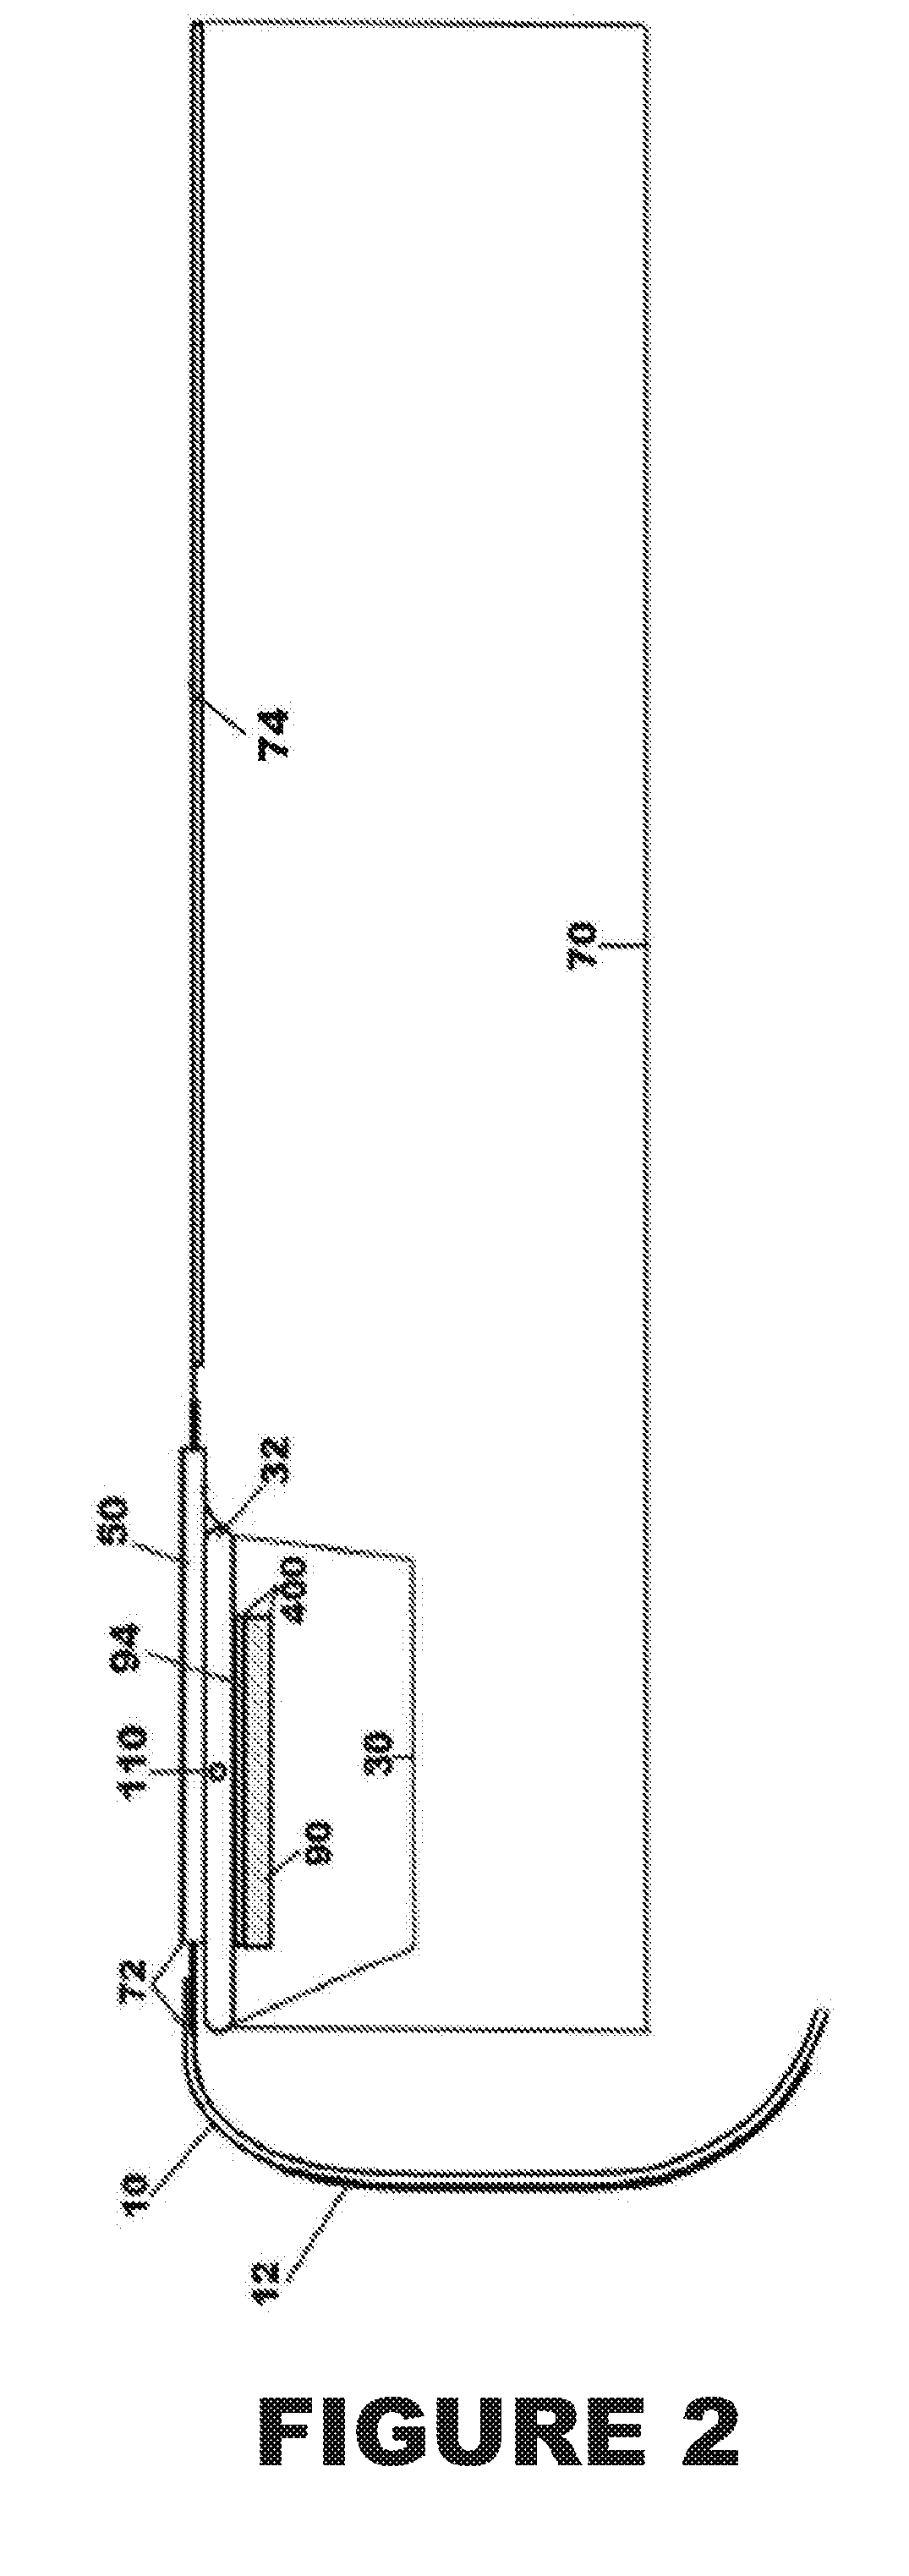 Percutaneous vascular injury treatment systems and methods